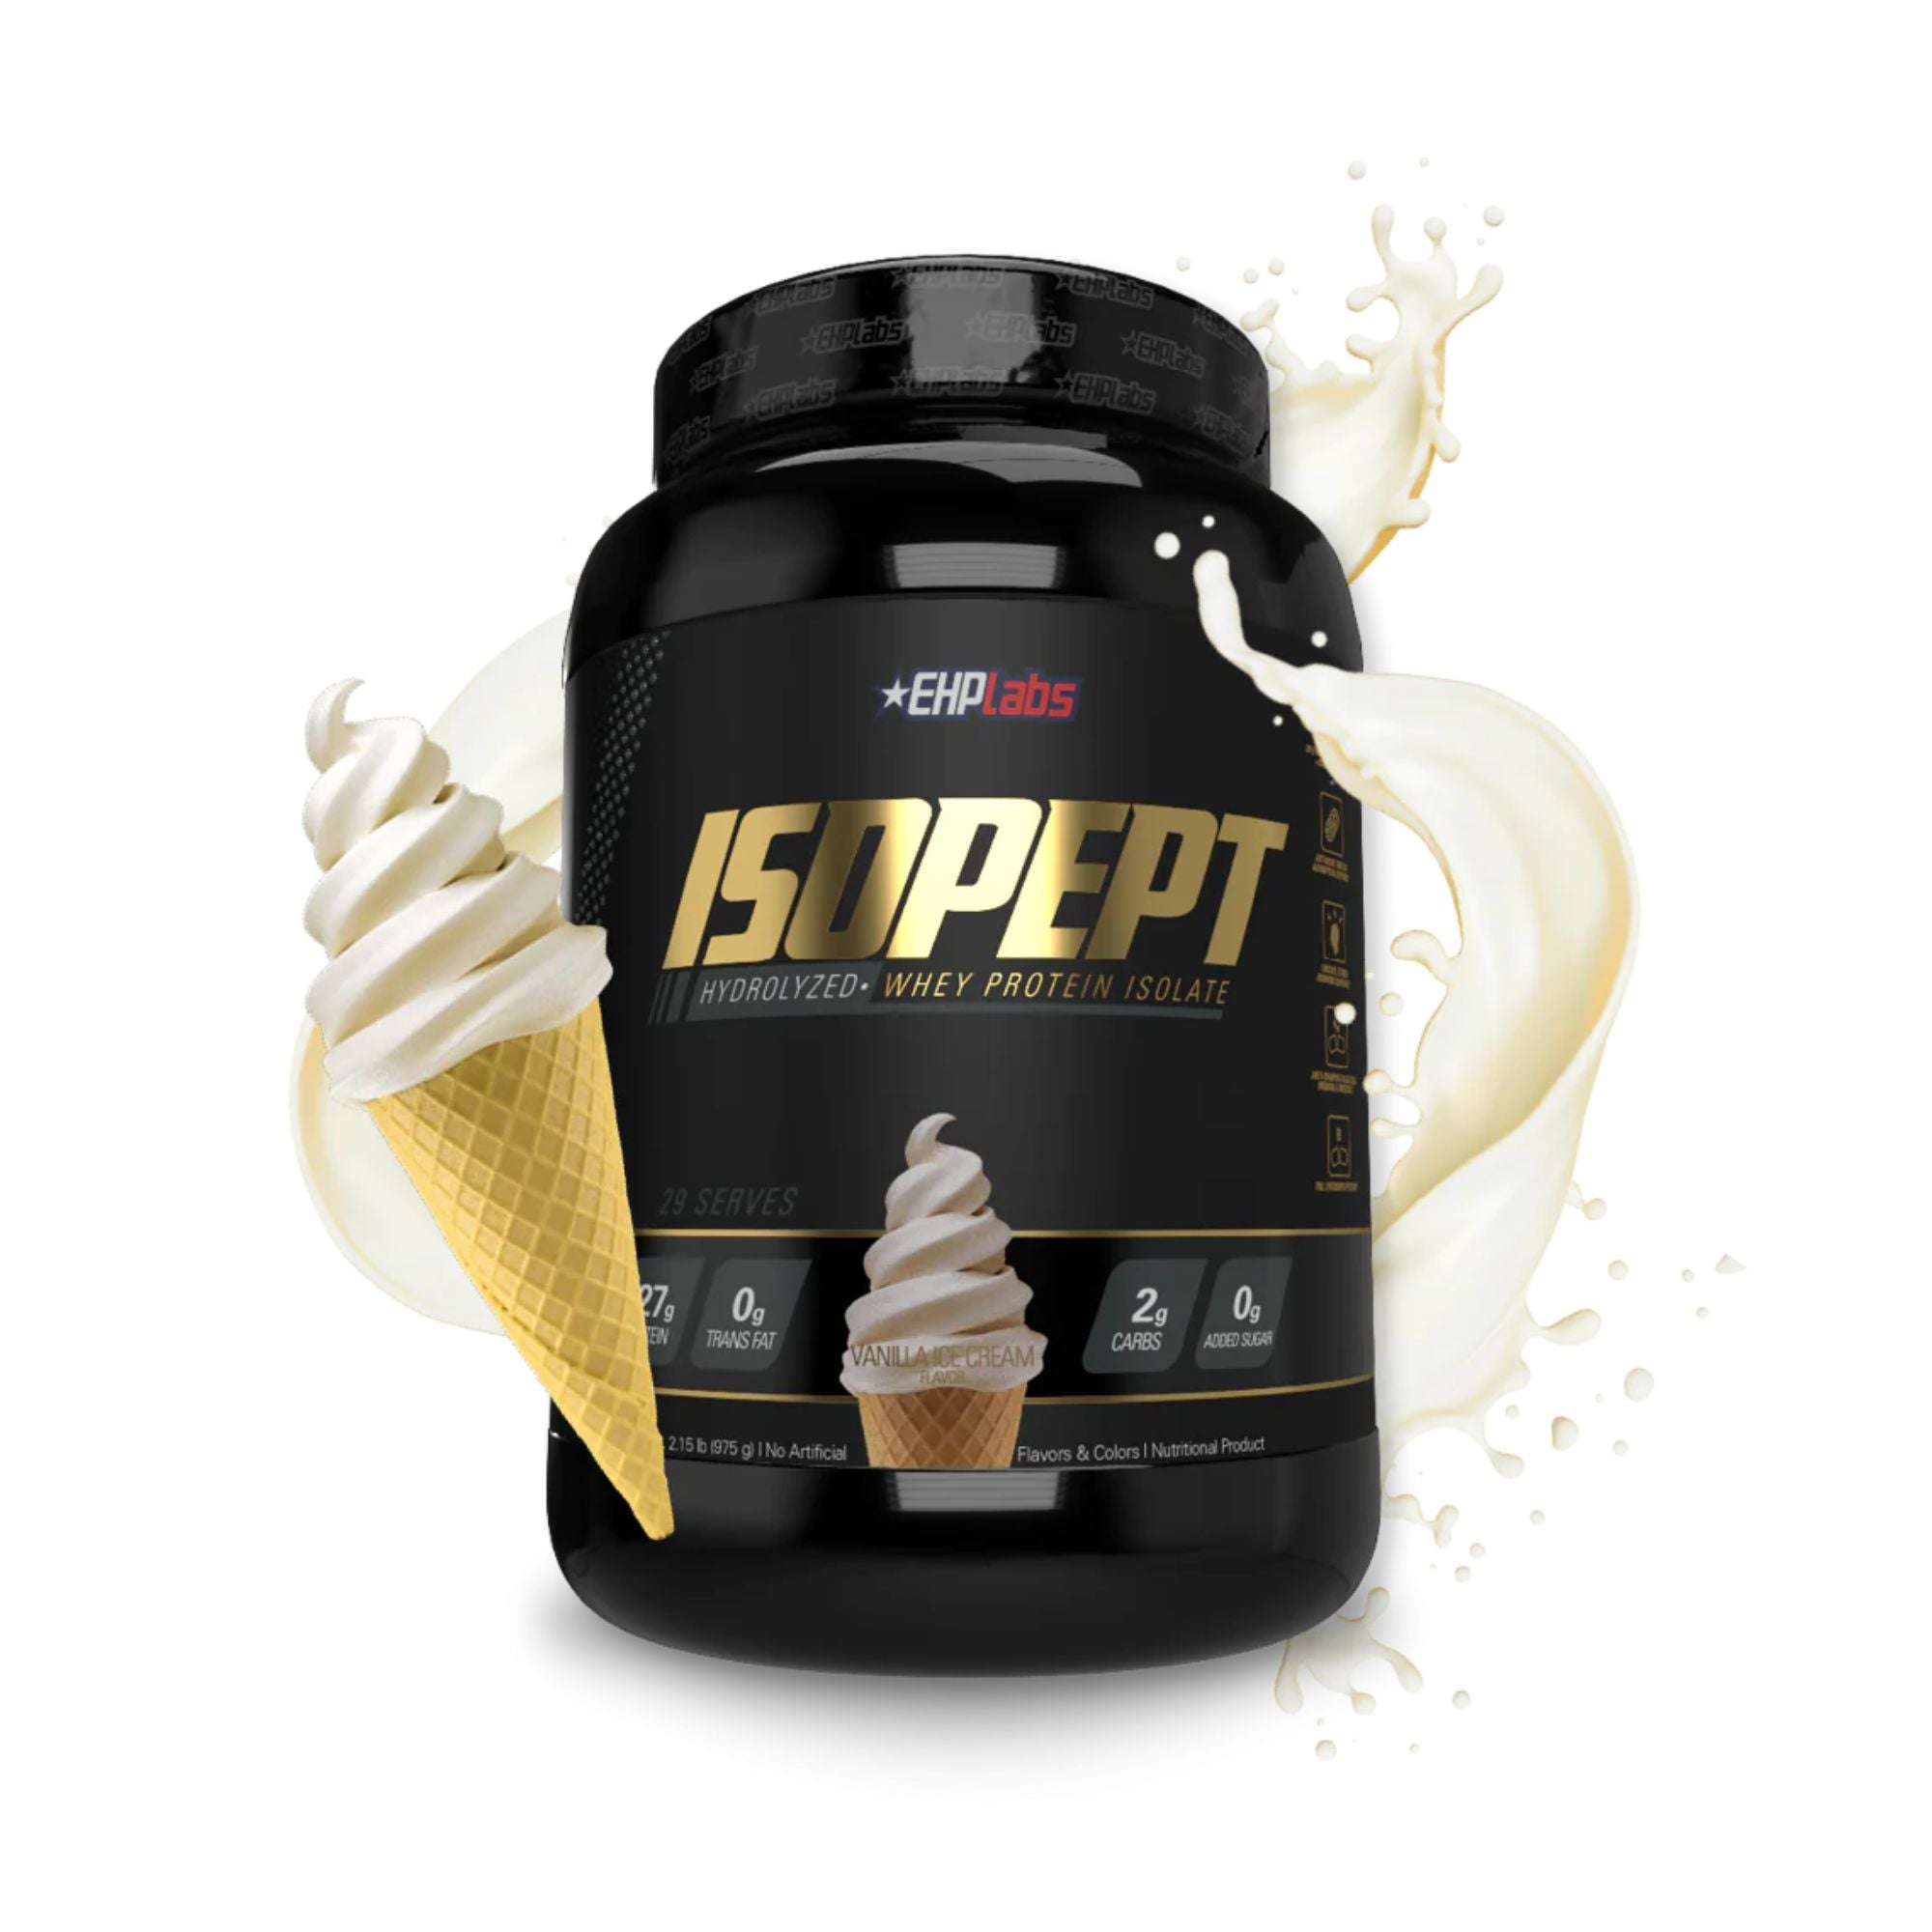 EHP Labs Isopept Protein Powder Whey Protein Isolate